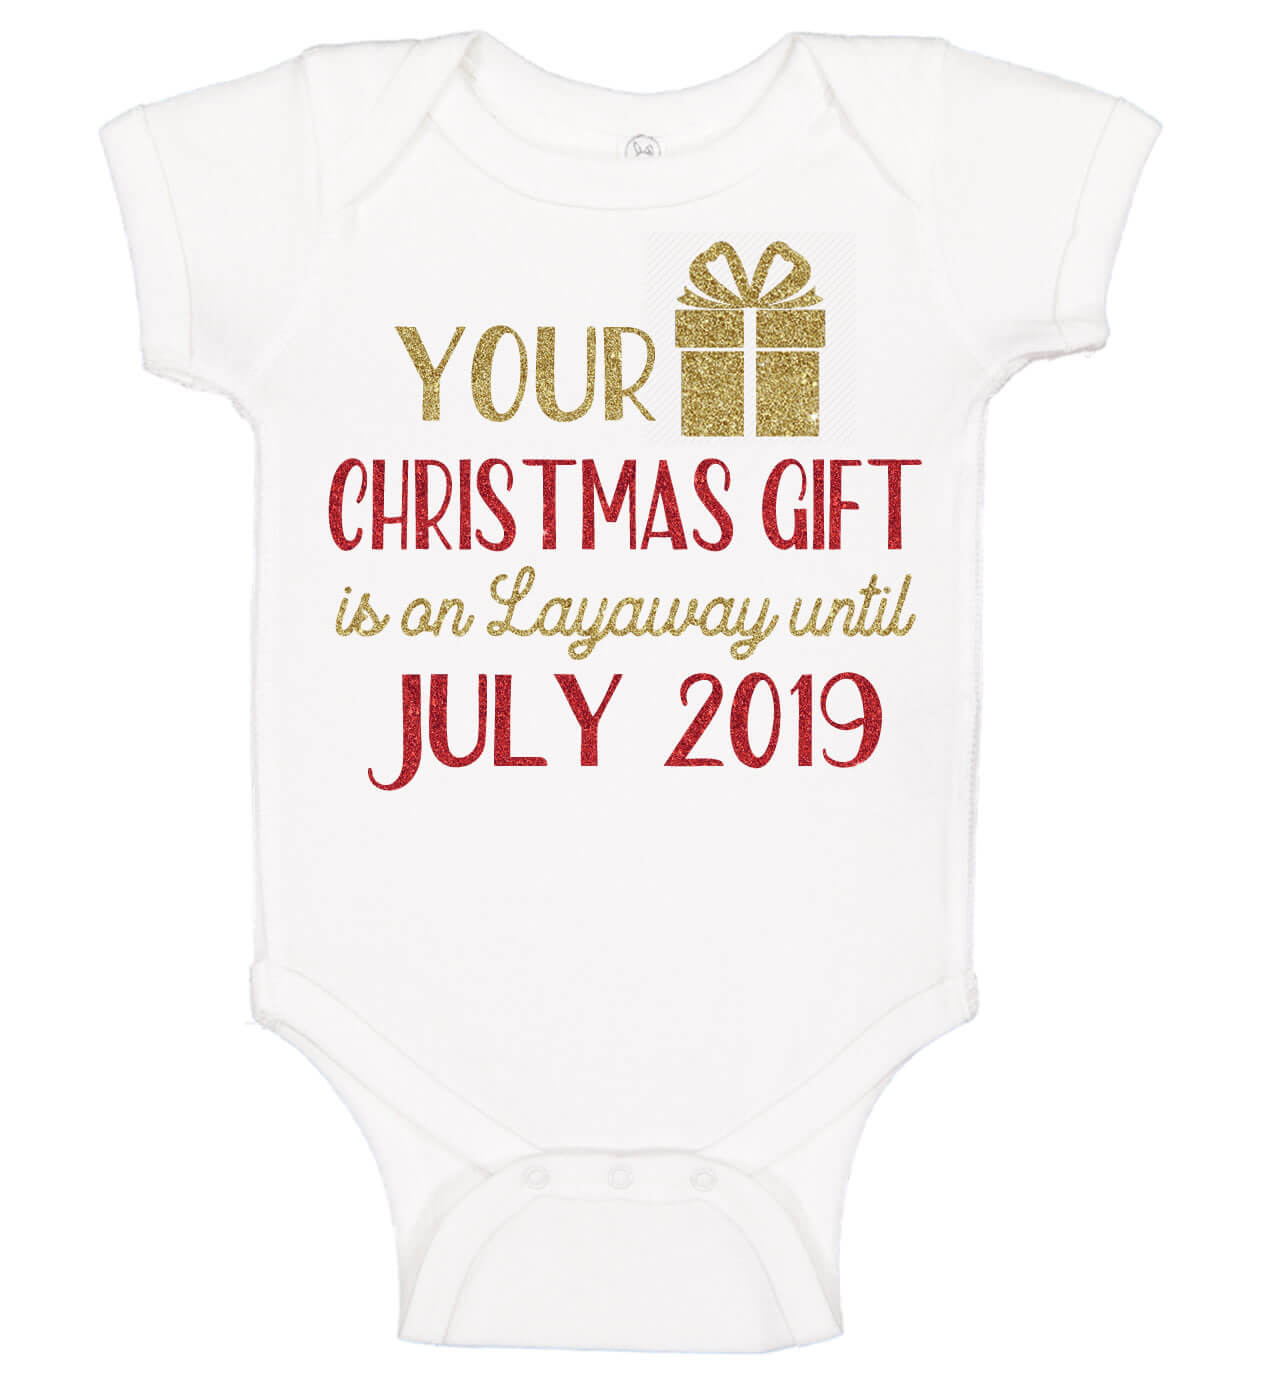 Cute Christmas Baby Announcement Onesie to Grandparents Personalized Christmas Announcement Onesie. Christmas Gift Layaway Surprise Pregnancy Announcement Onesie to Family for Christmas 